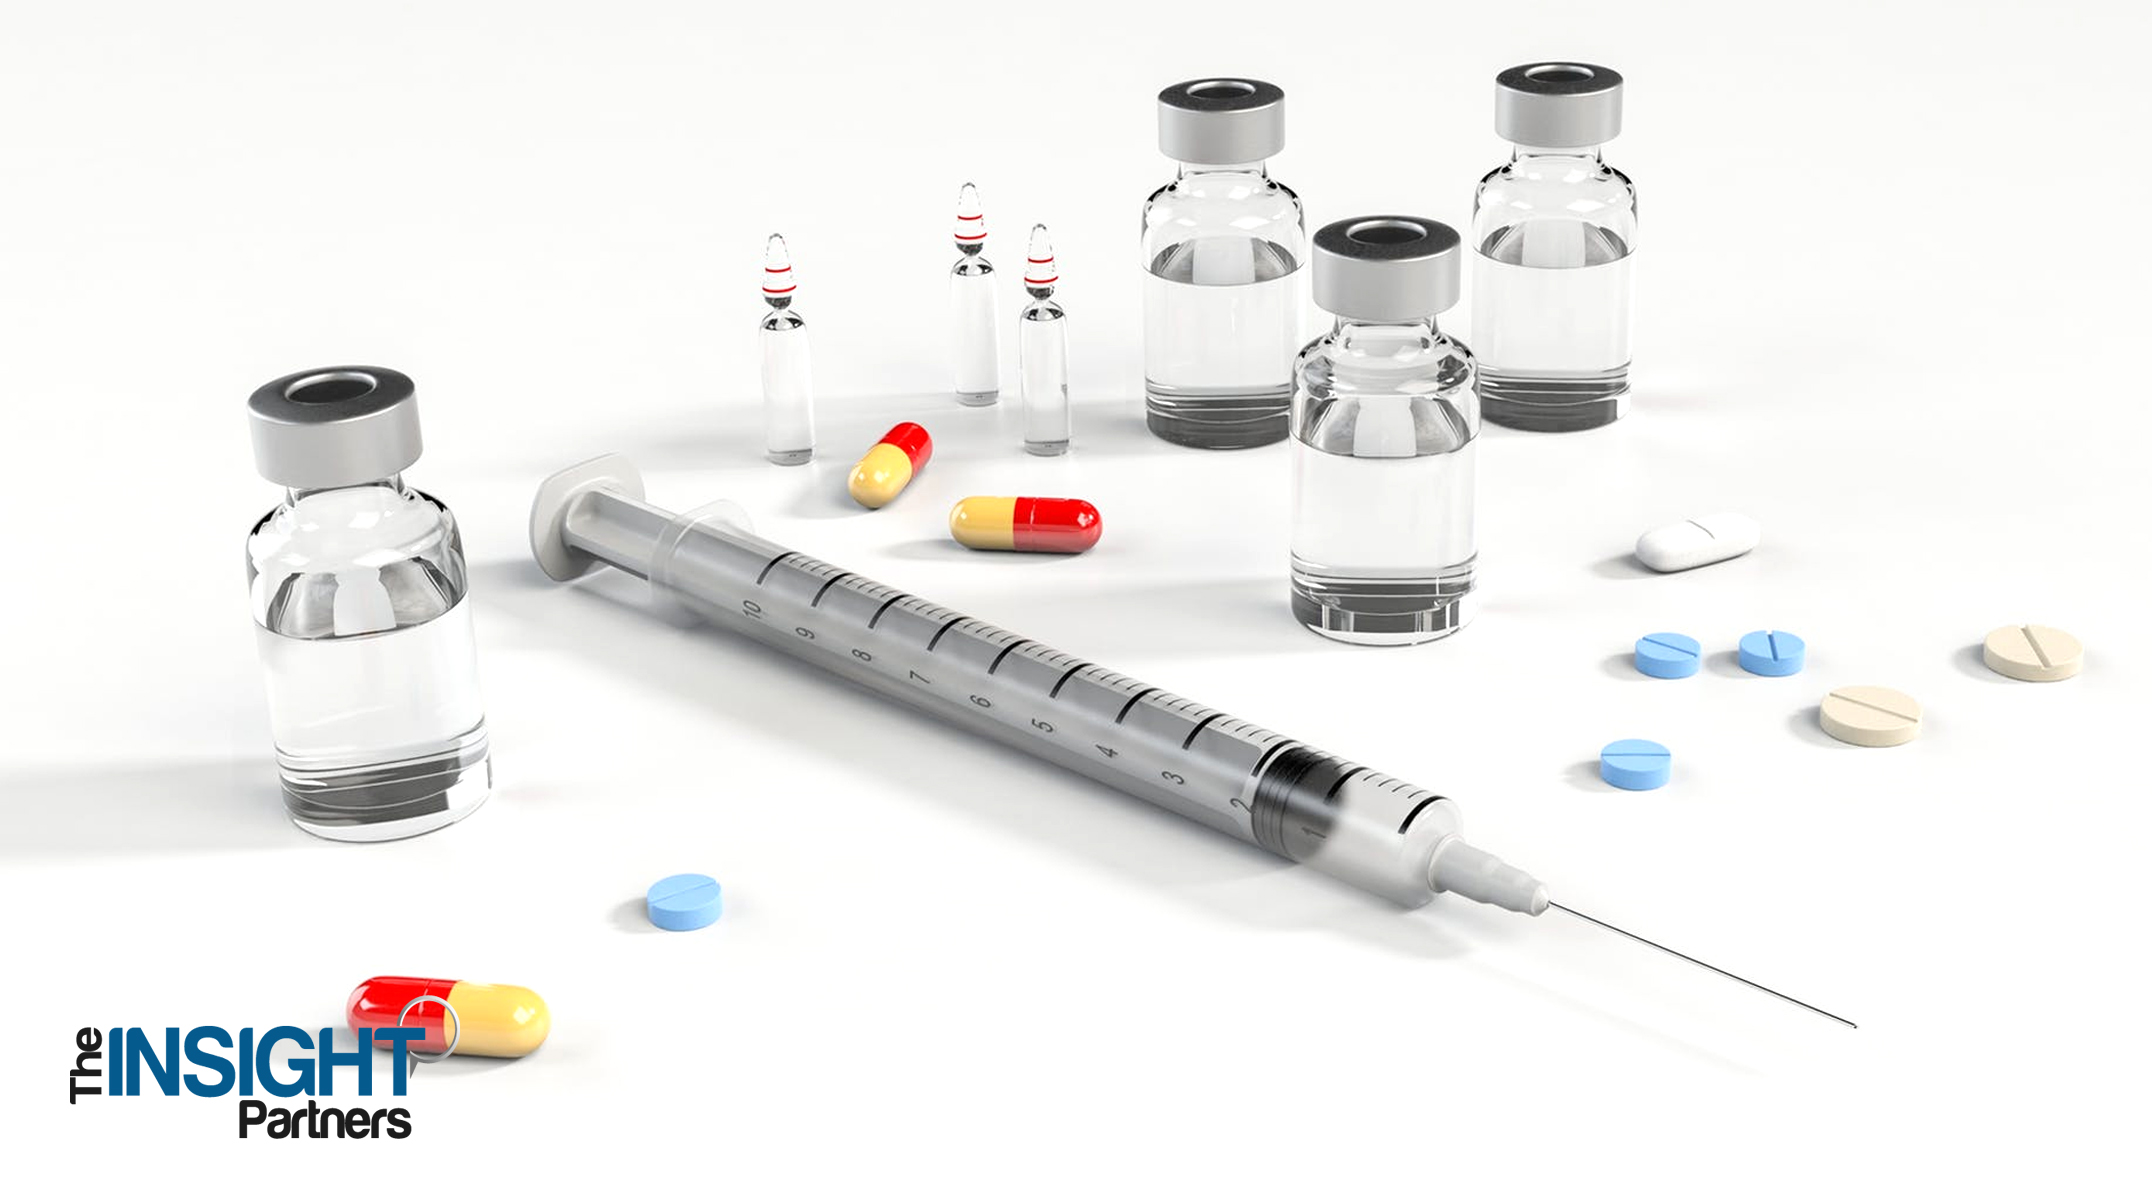 2019 Aesthetic Medicine Market Analysis by Increasing Investments and Rising Demand by Galderma laboratories, Bausch Health, PhotoMedex, Merz Aesthetics